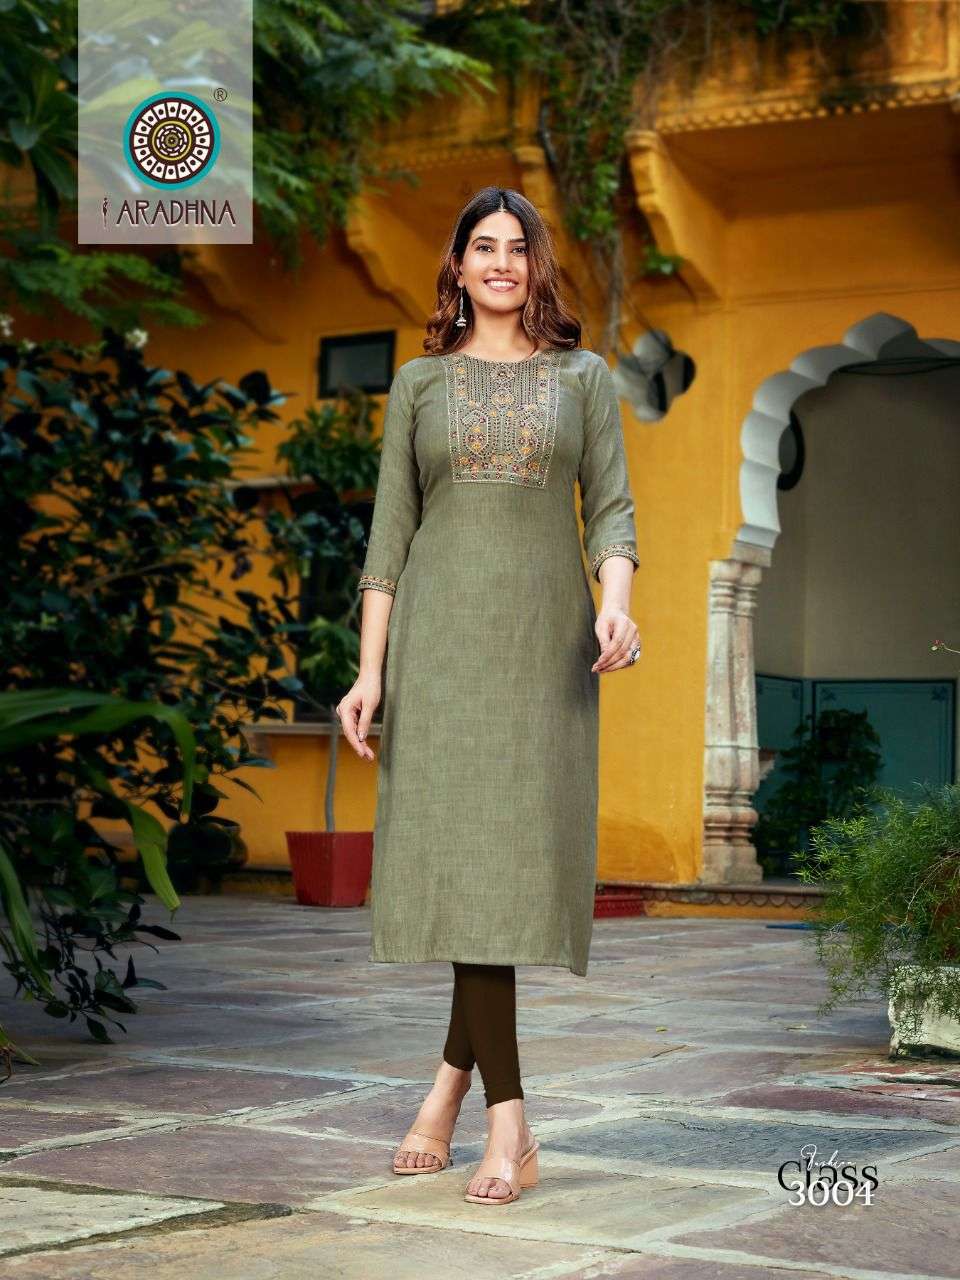 FASHION CLASS VOL-3 BY ARADHNA FASHION 3001 TO 3005 SERIES DESIGNER STYLISH FANCY COLORFUL BEAUTIFUL PARTY WEAR & ETHNIC WEAR COLLECTION RAYON EMBROIDERED KURTIS AT WHOLESALE PRICE